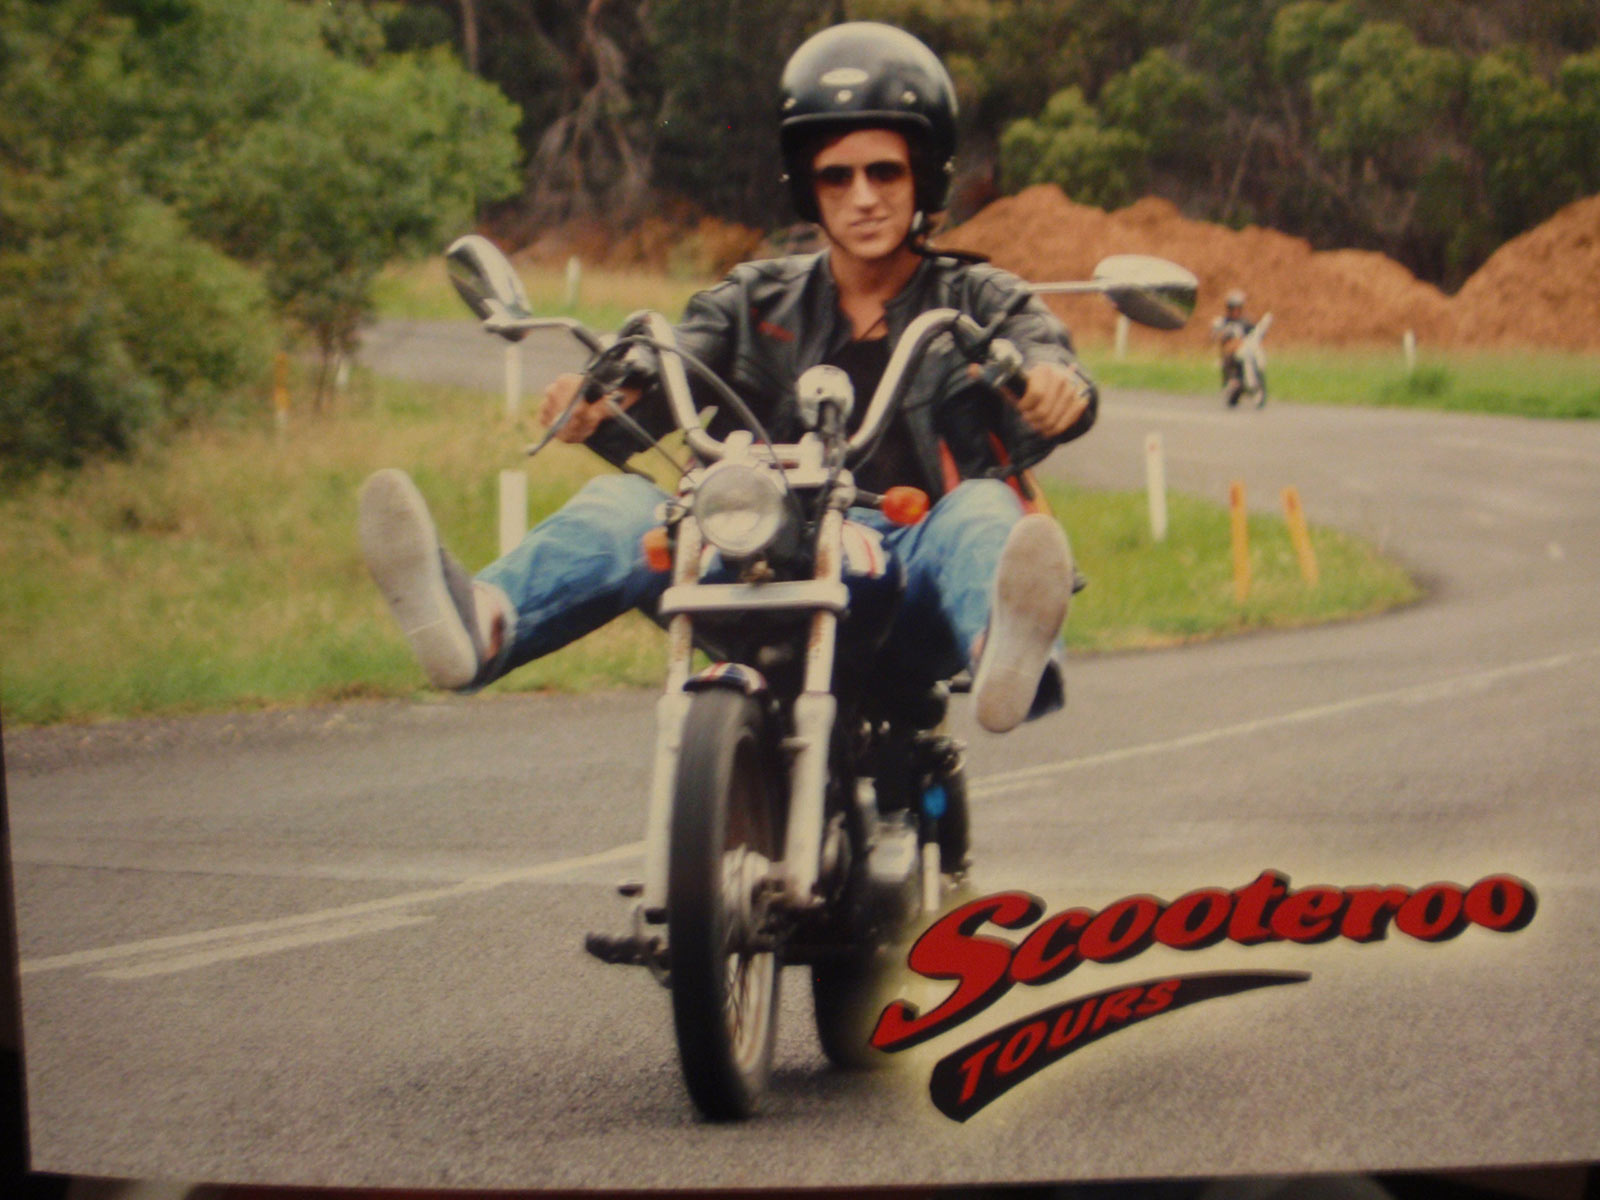 David Simpson riding a motor bike in Scooter Roo tour in Fraser Island. Dingos on Fraser Island